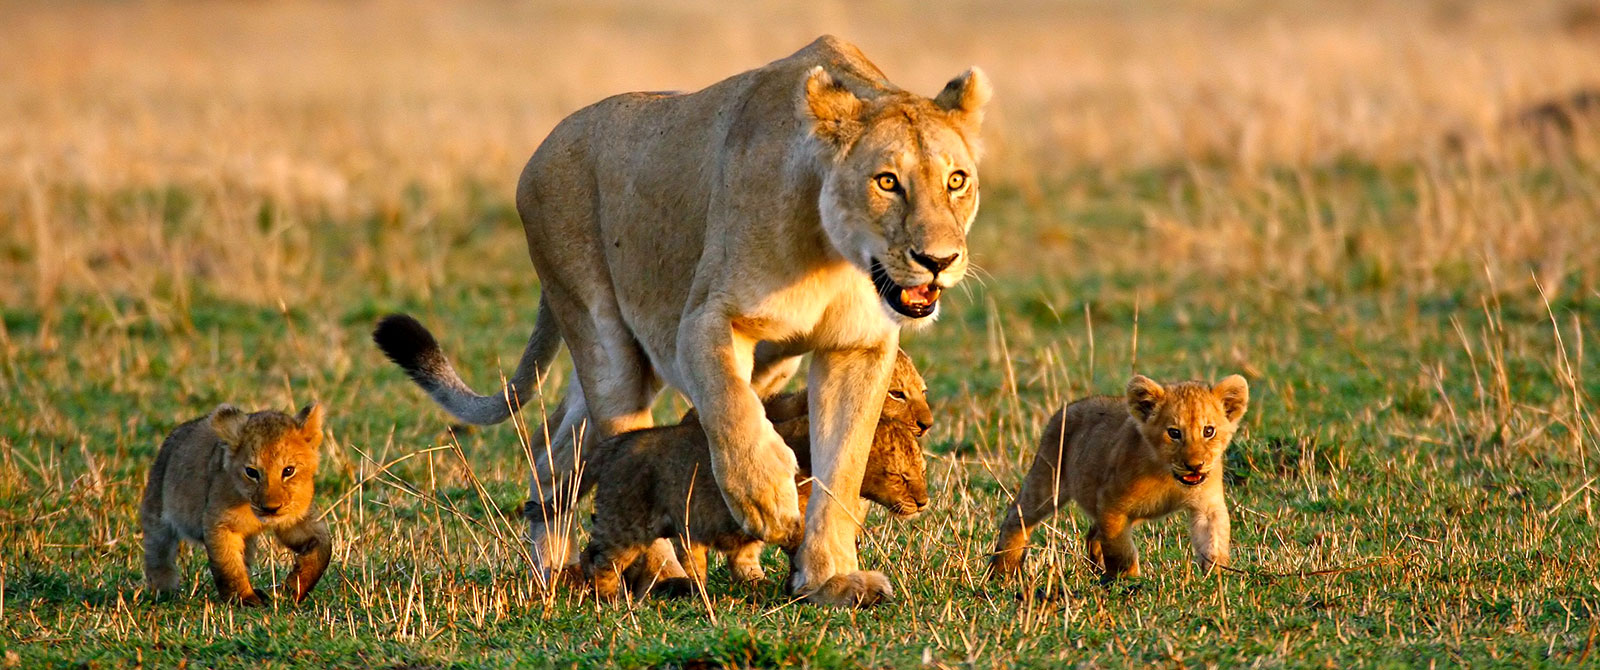 Lioness and Her Cubs in Hwange National Park